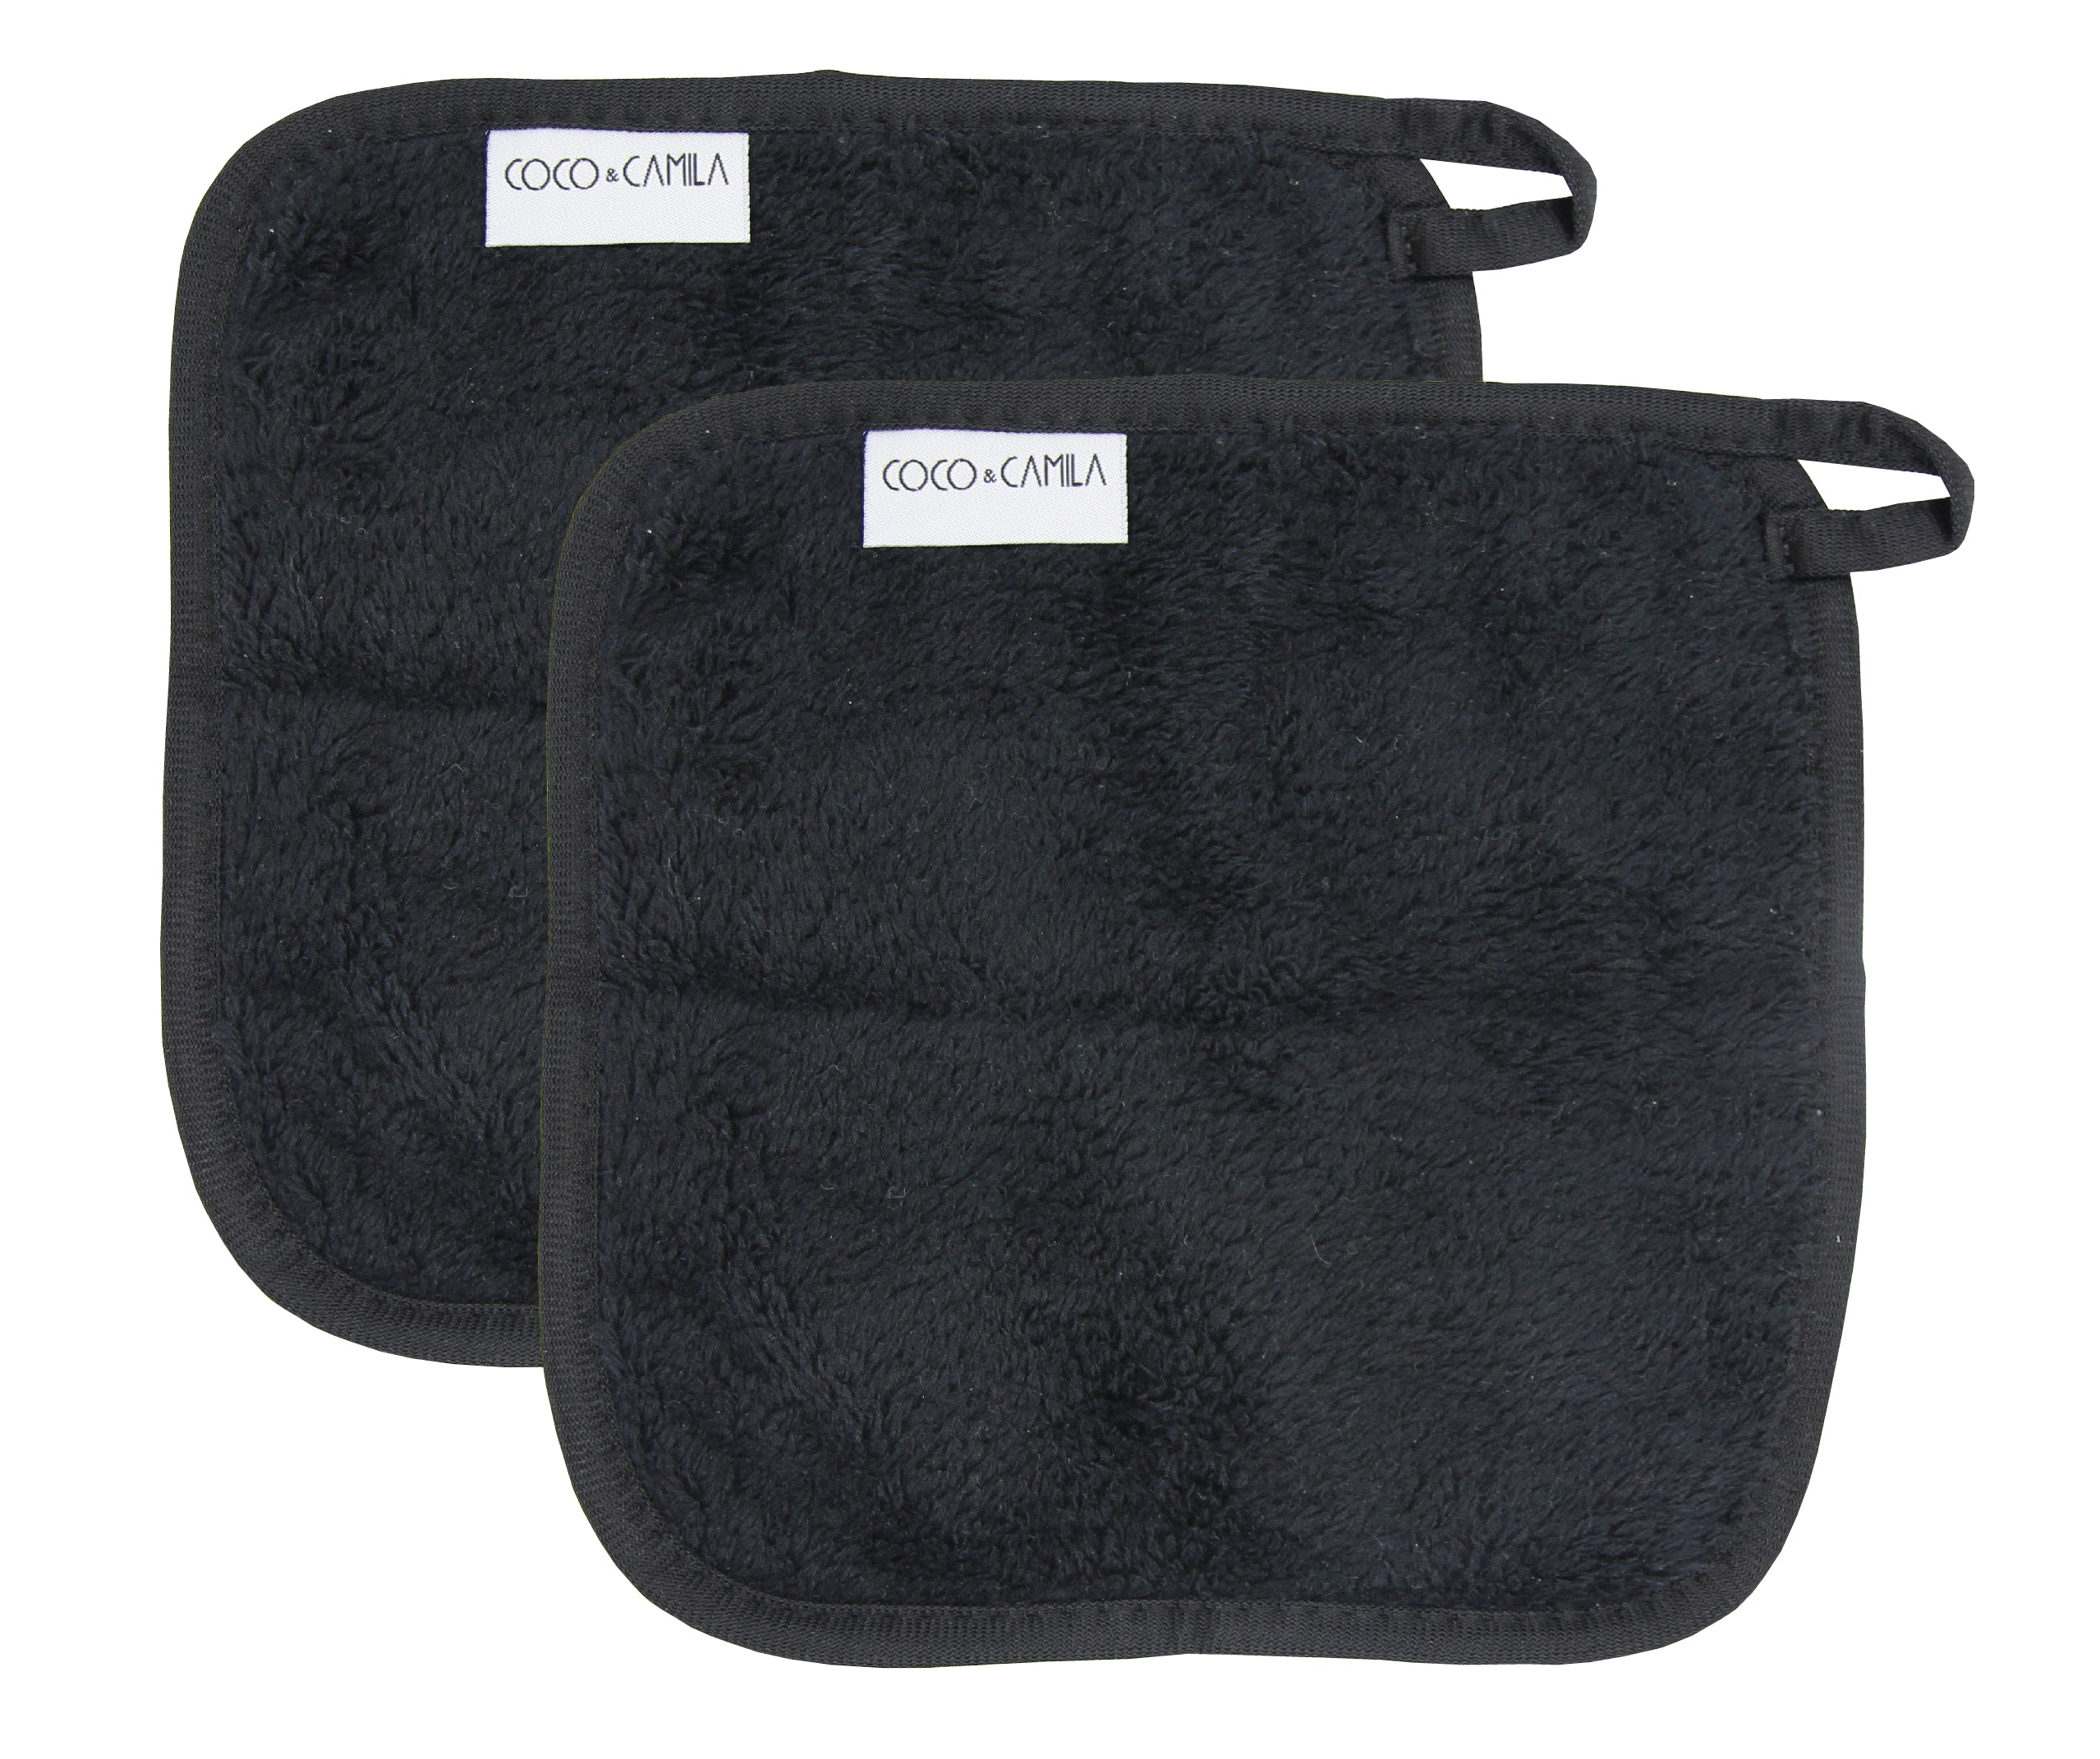 Coco & Camila Cleansing Cloth Stockist (Black Friday)